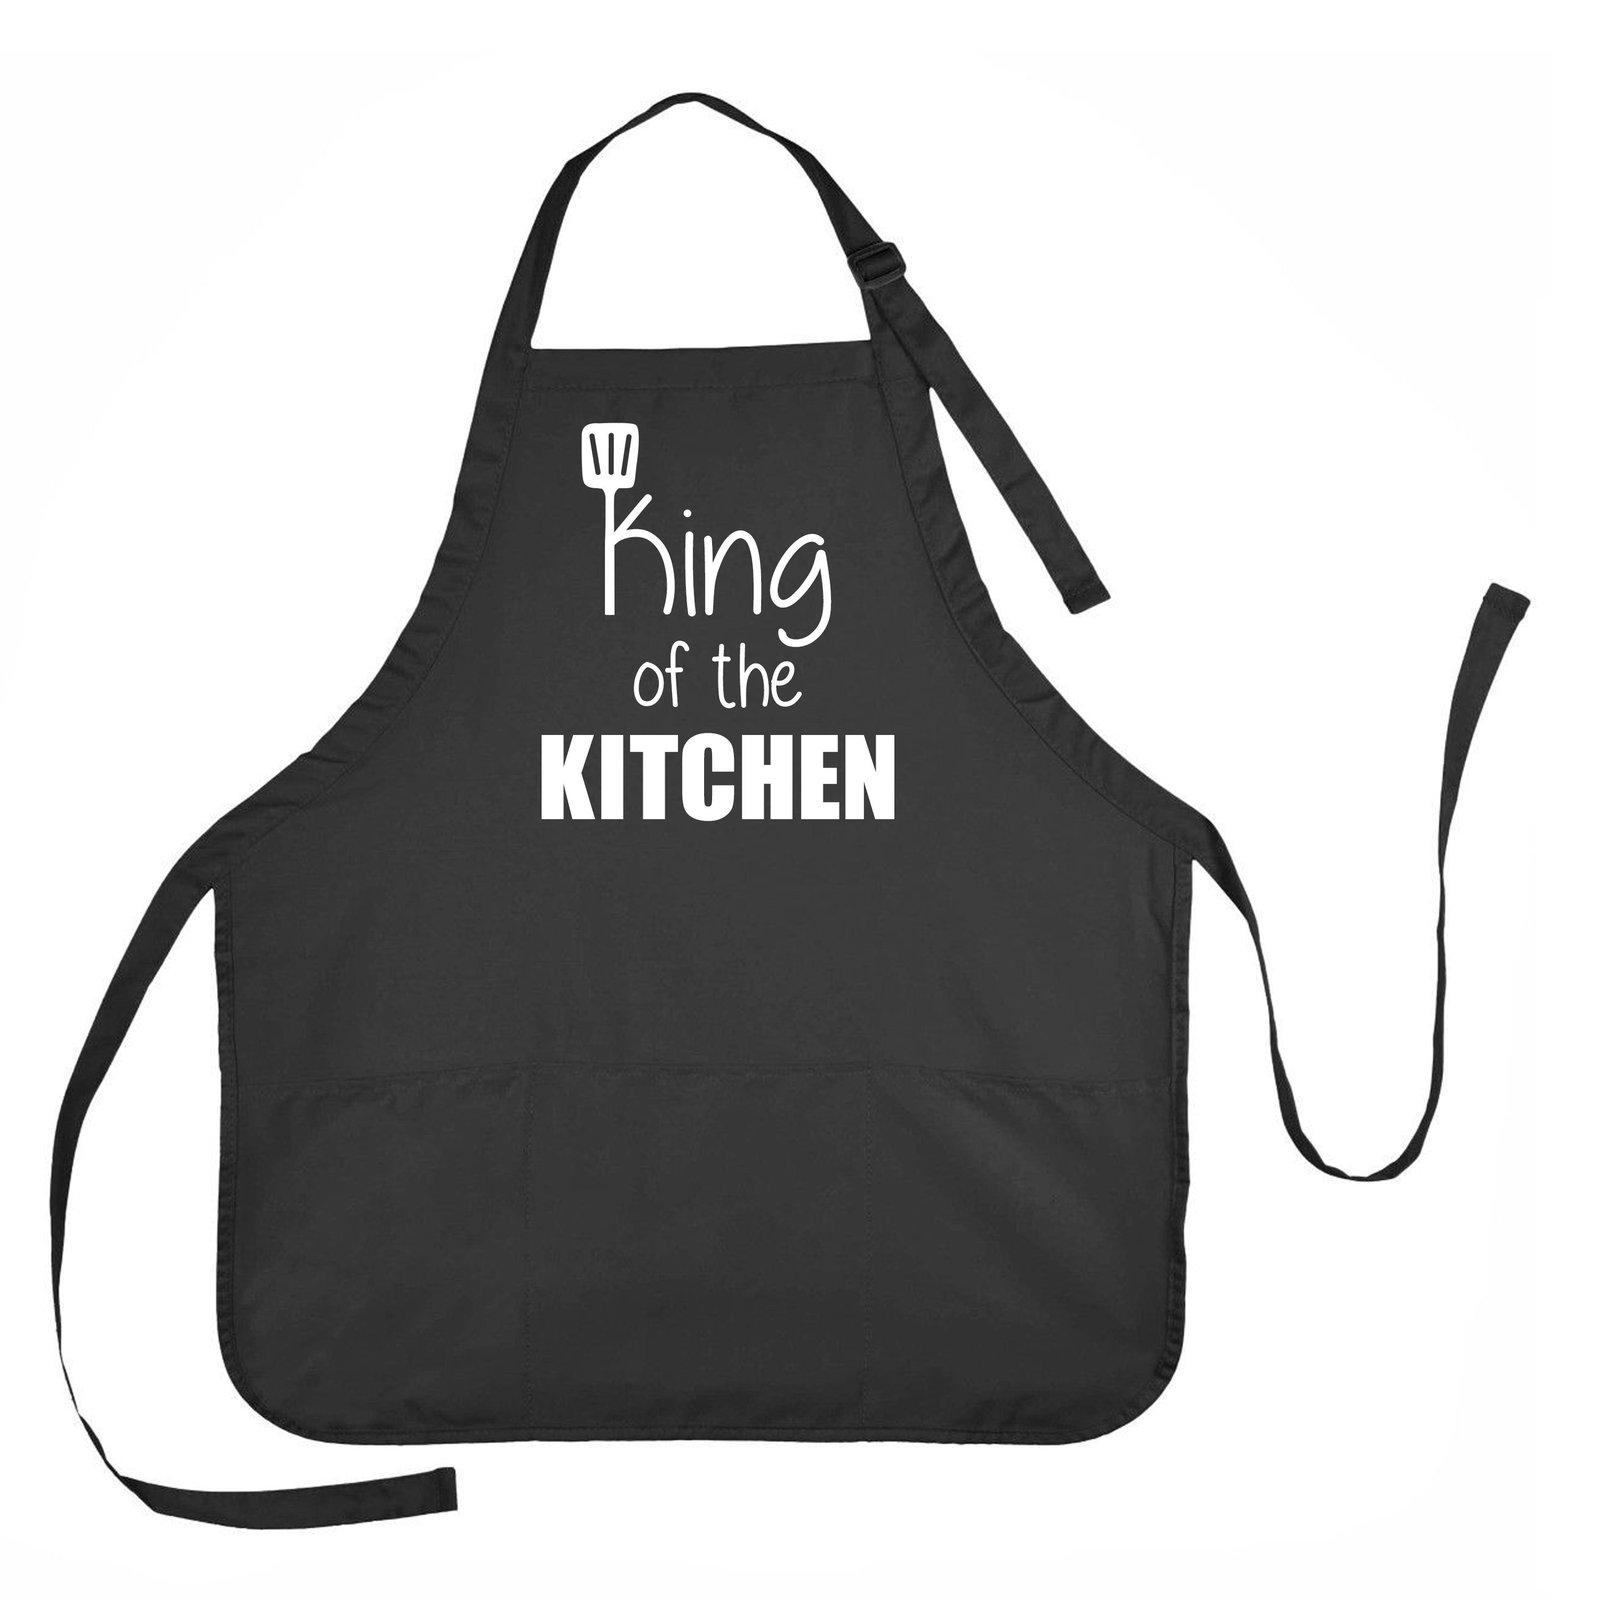 Primary image for King of the Kitchen Apron, Father's Day Apron, Dad's Kitchen Apron